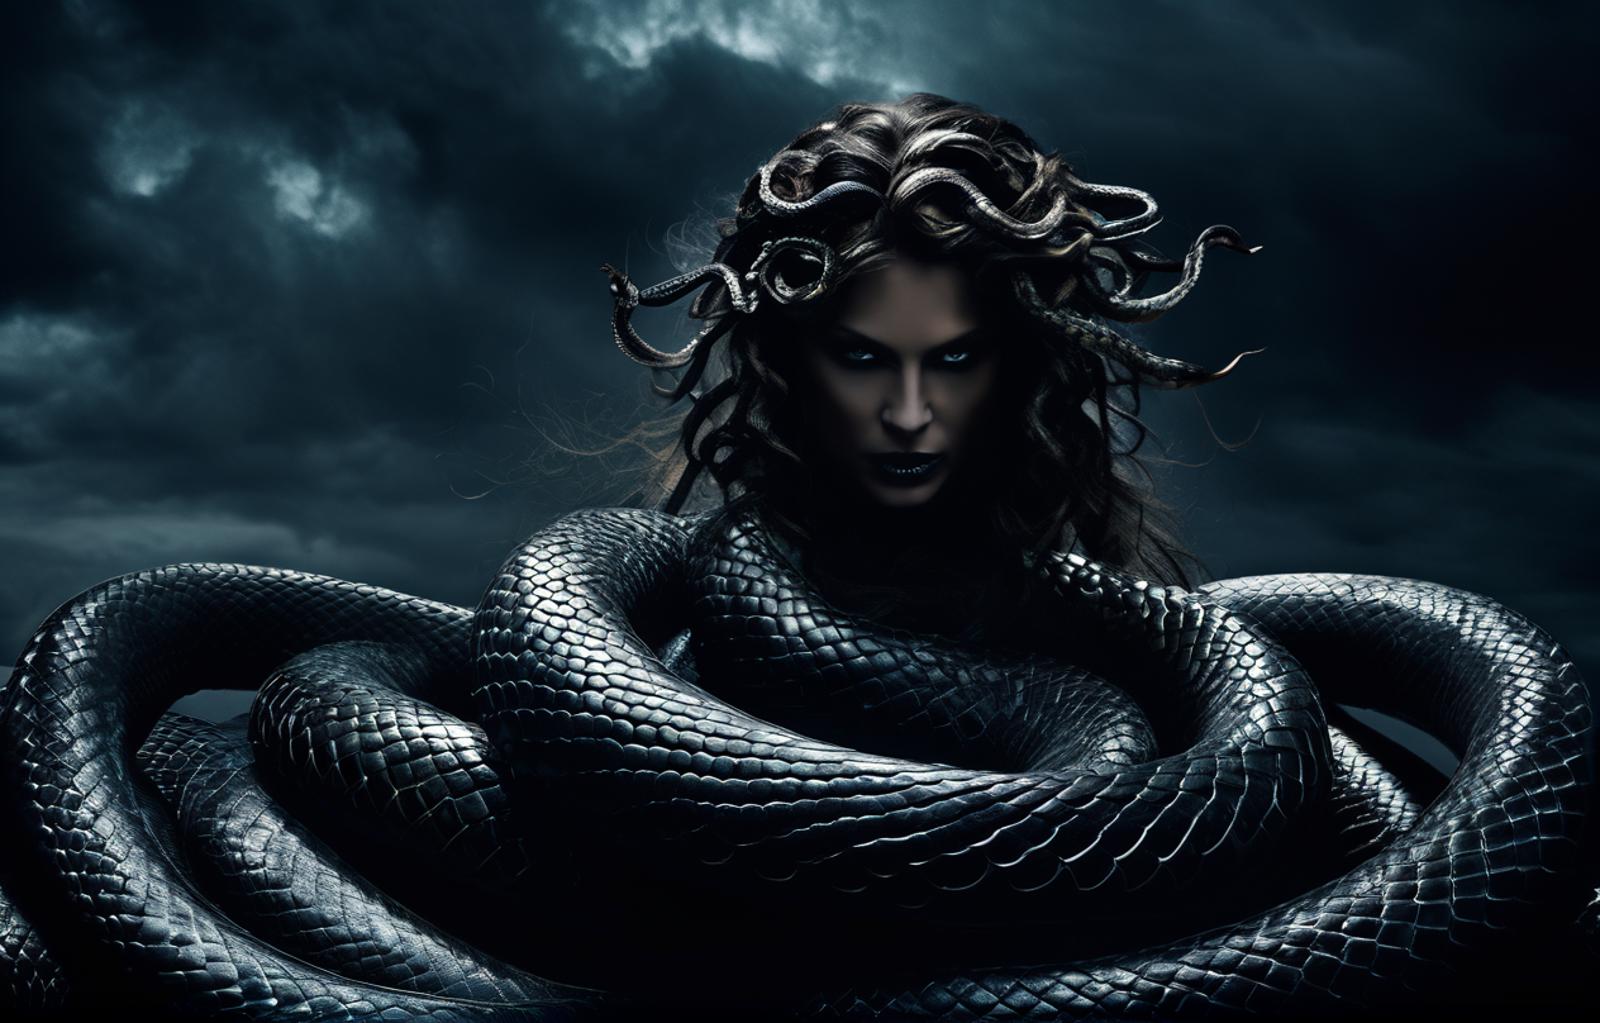 A woman with a serpent's head and black hair, surrounded by a dark and stormy sky.